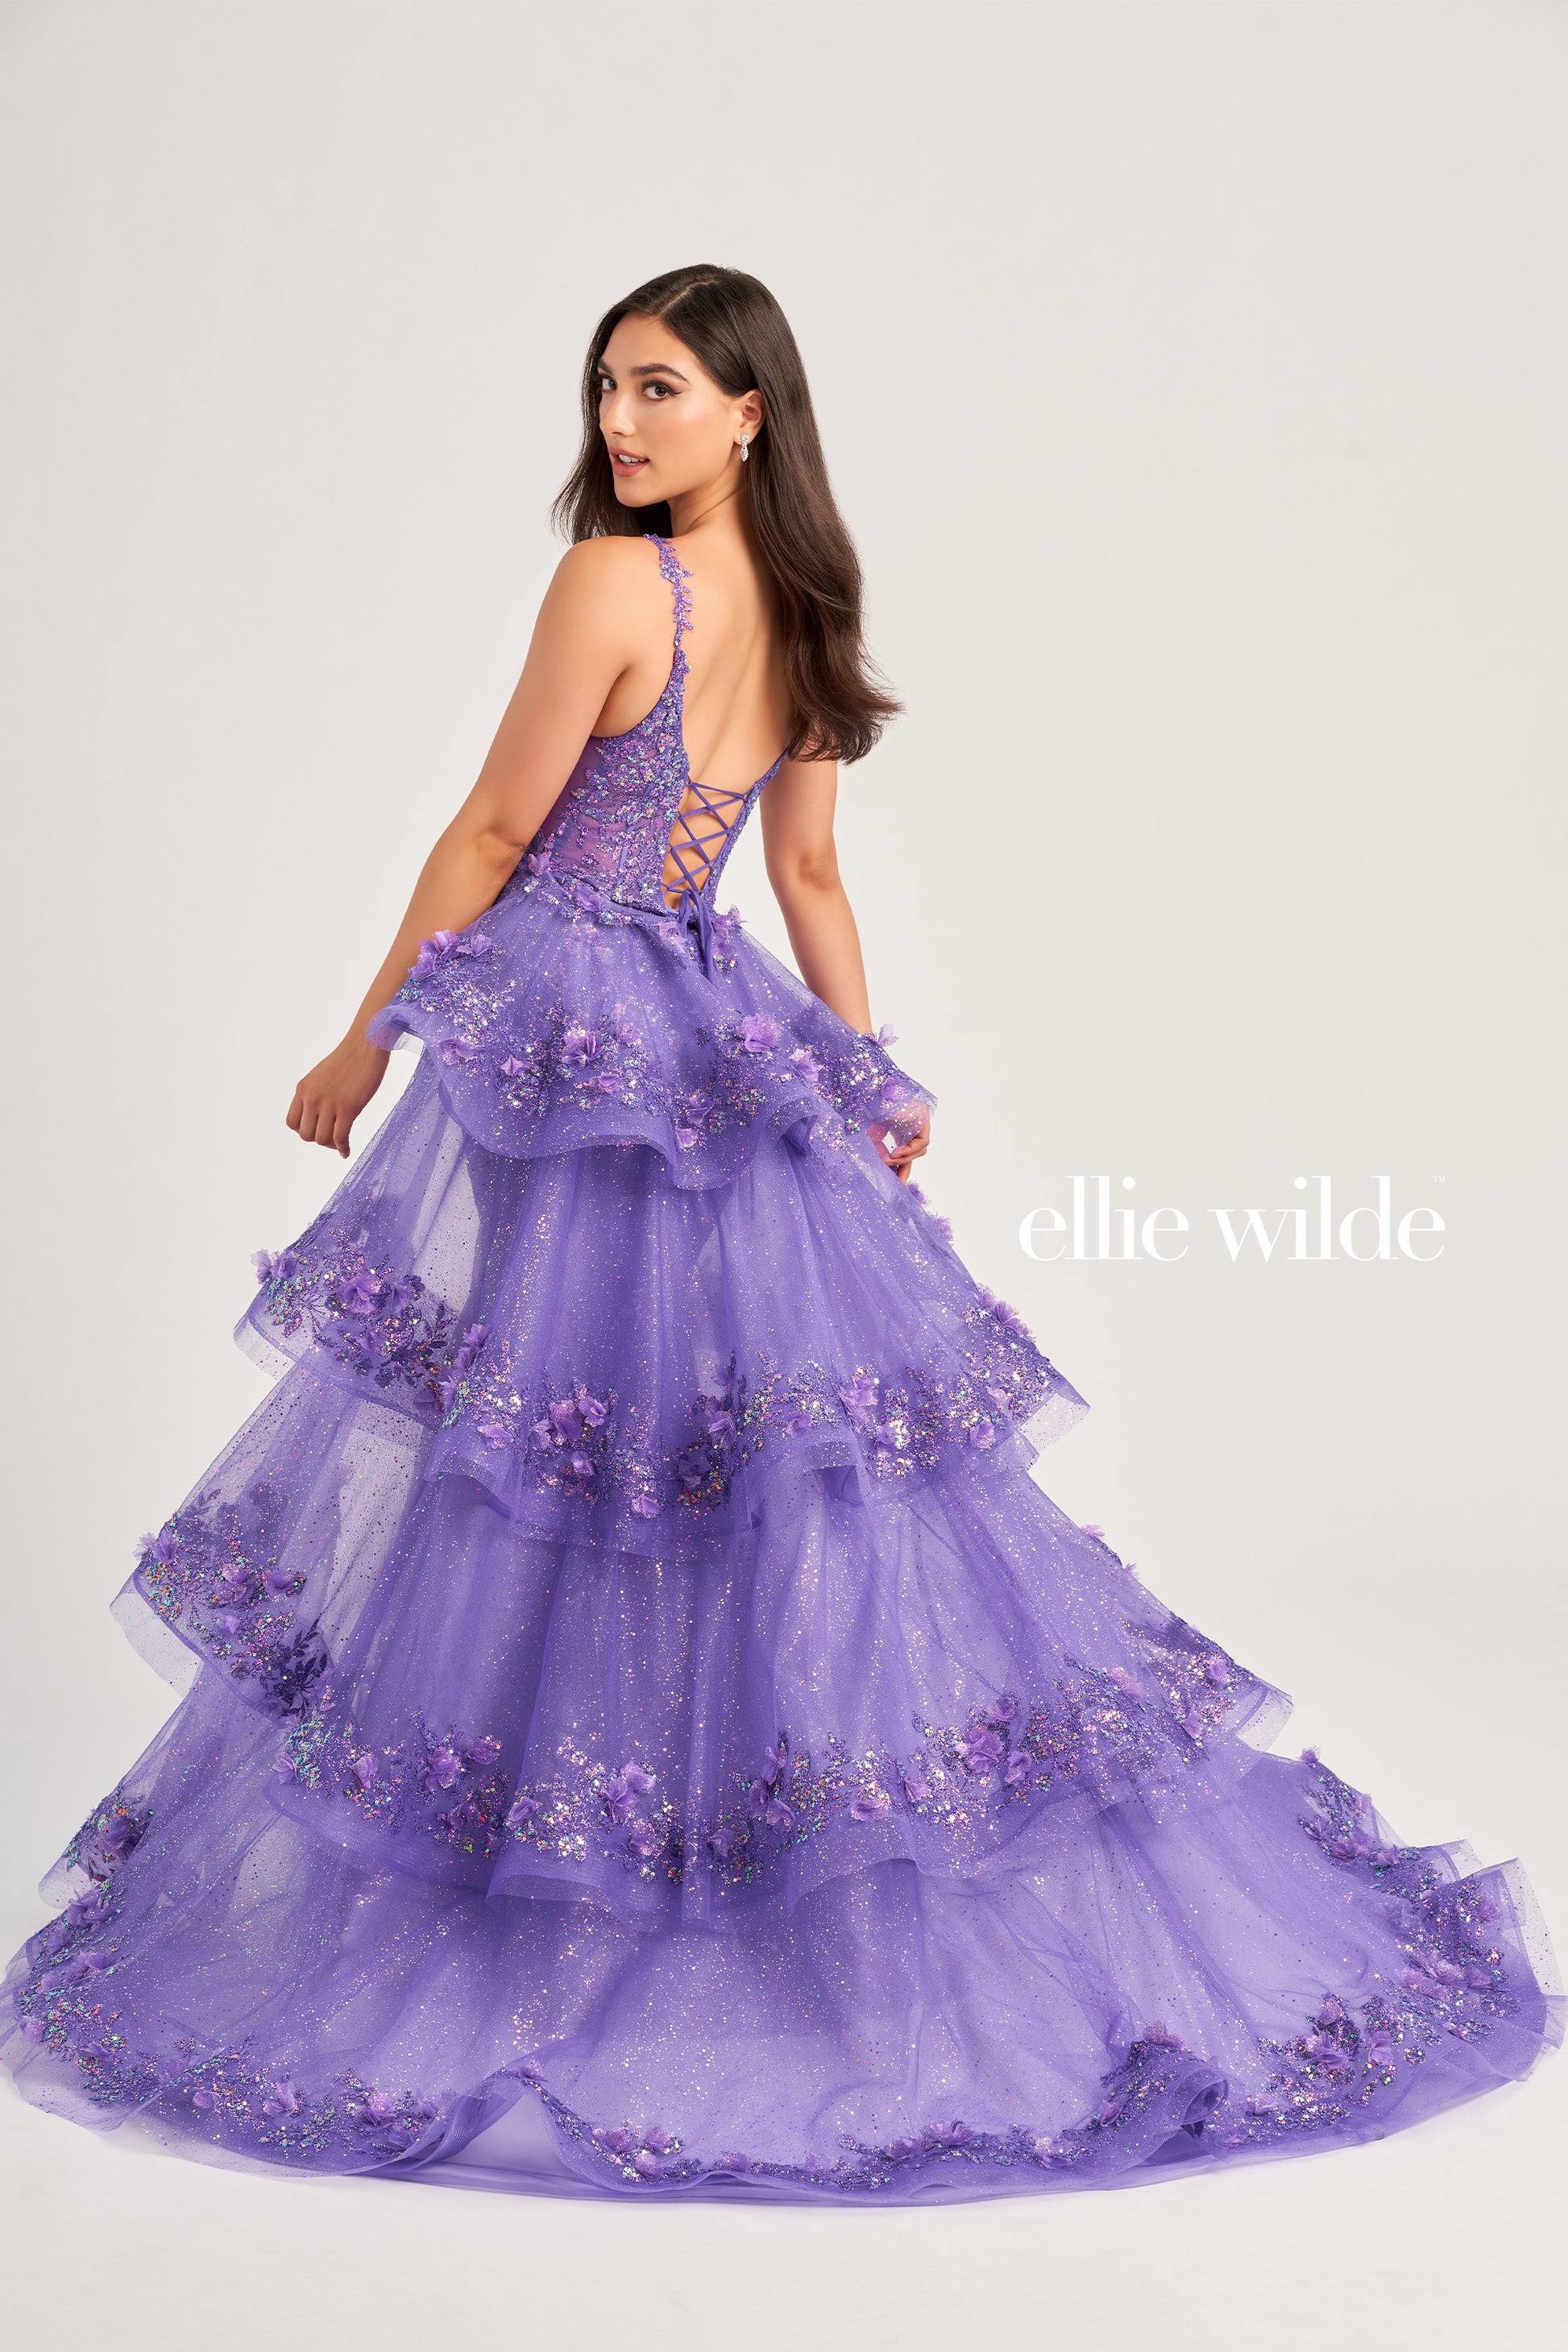 Look and feel your best in the Ellie Wilde EW35045 Prom Dress. This stunning piece features a sheer corset bodice with sequin and 3D Floral Lace accents, a detachable layered  train, three-dimensional flowers, and a glitter tulle skirt. The dress is constructed with cracked ice, sequin, and delicate lace-up back for a truly memorable look.  COLOR: LIGHT BLUE, MAGENTA, LILAC, IRIS SIZE: 00 - 16